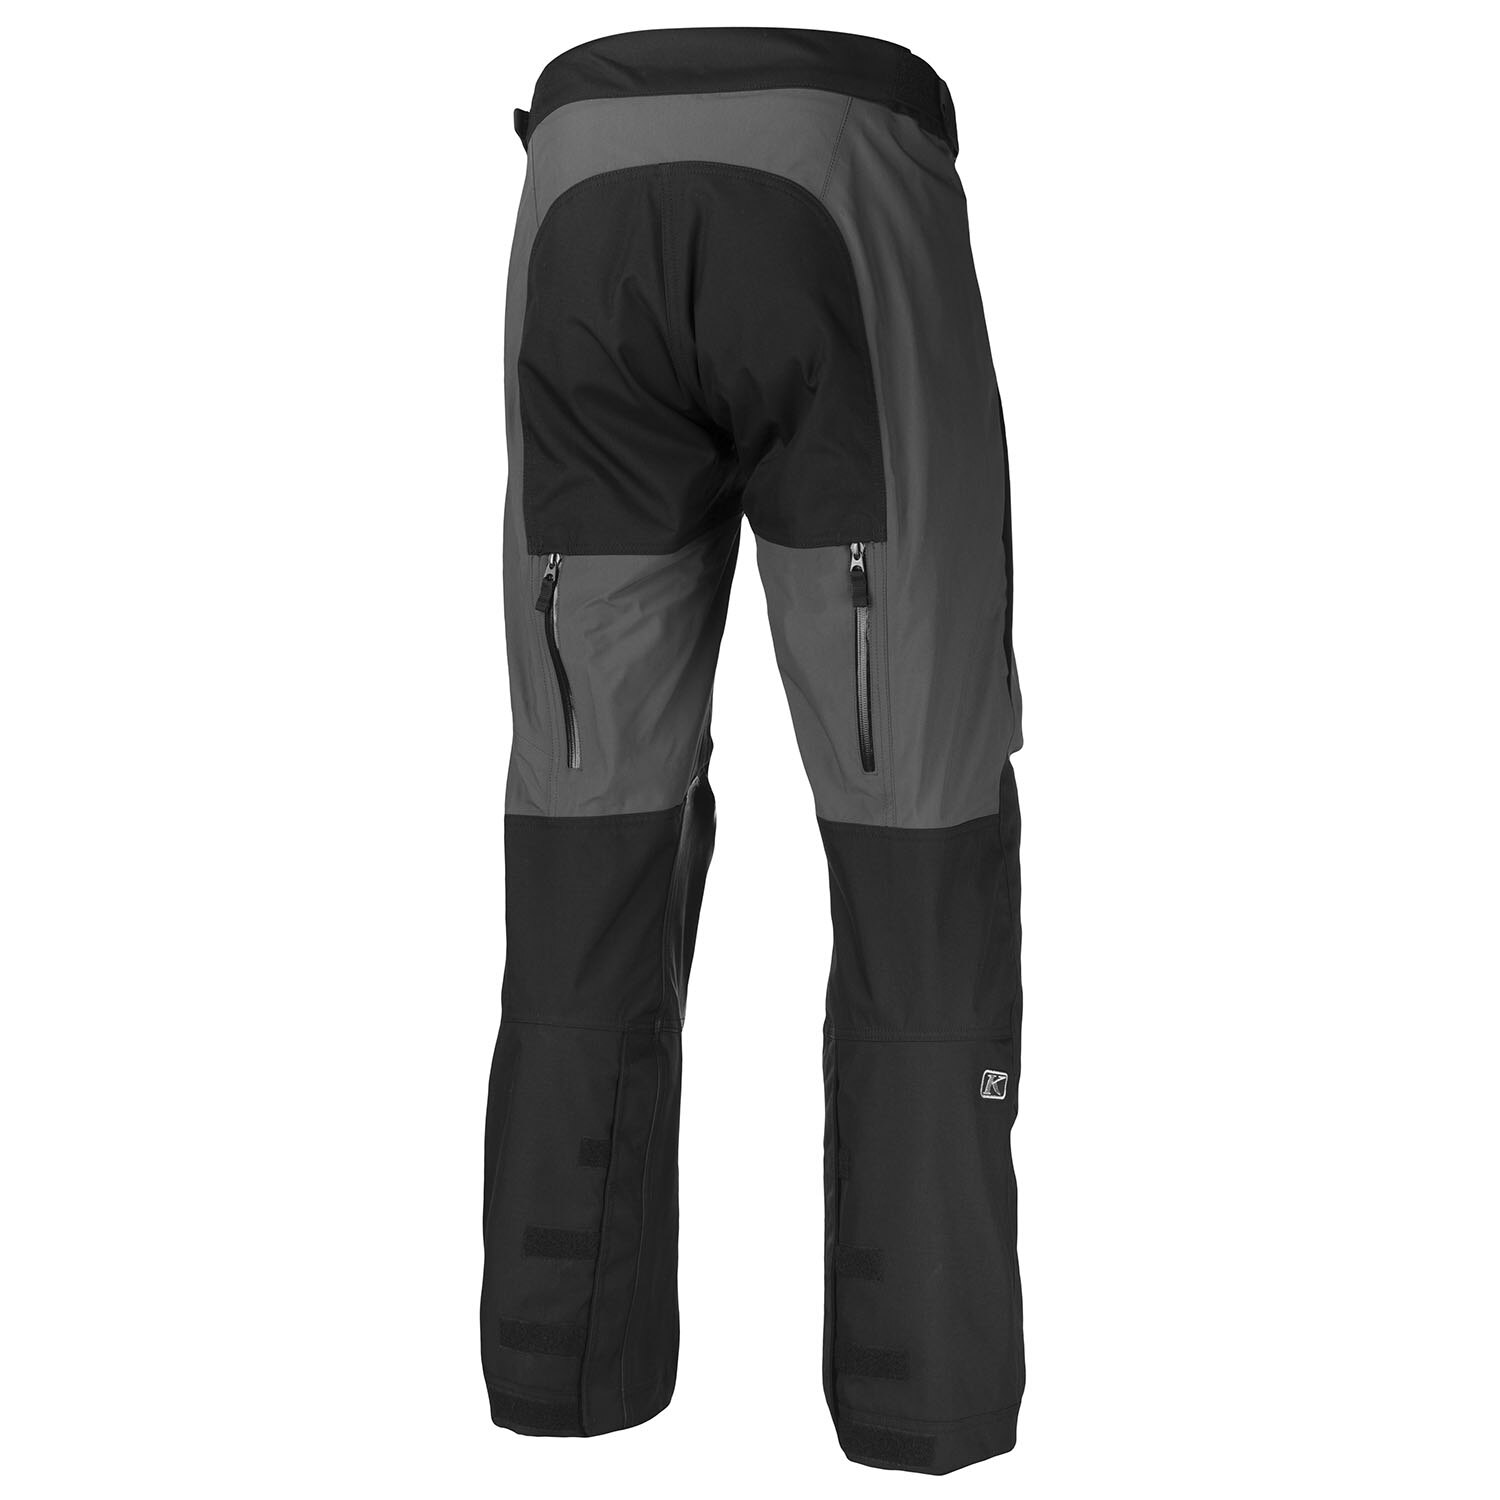 Traverse Pant (Non Current) Tall 32 Green